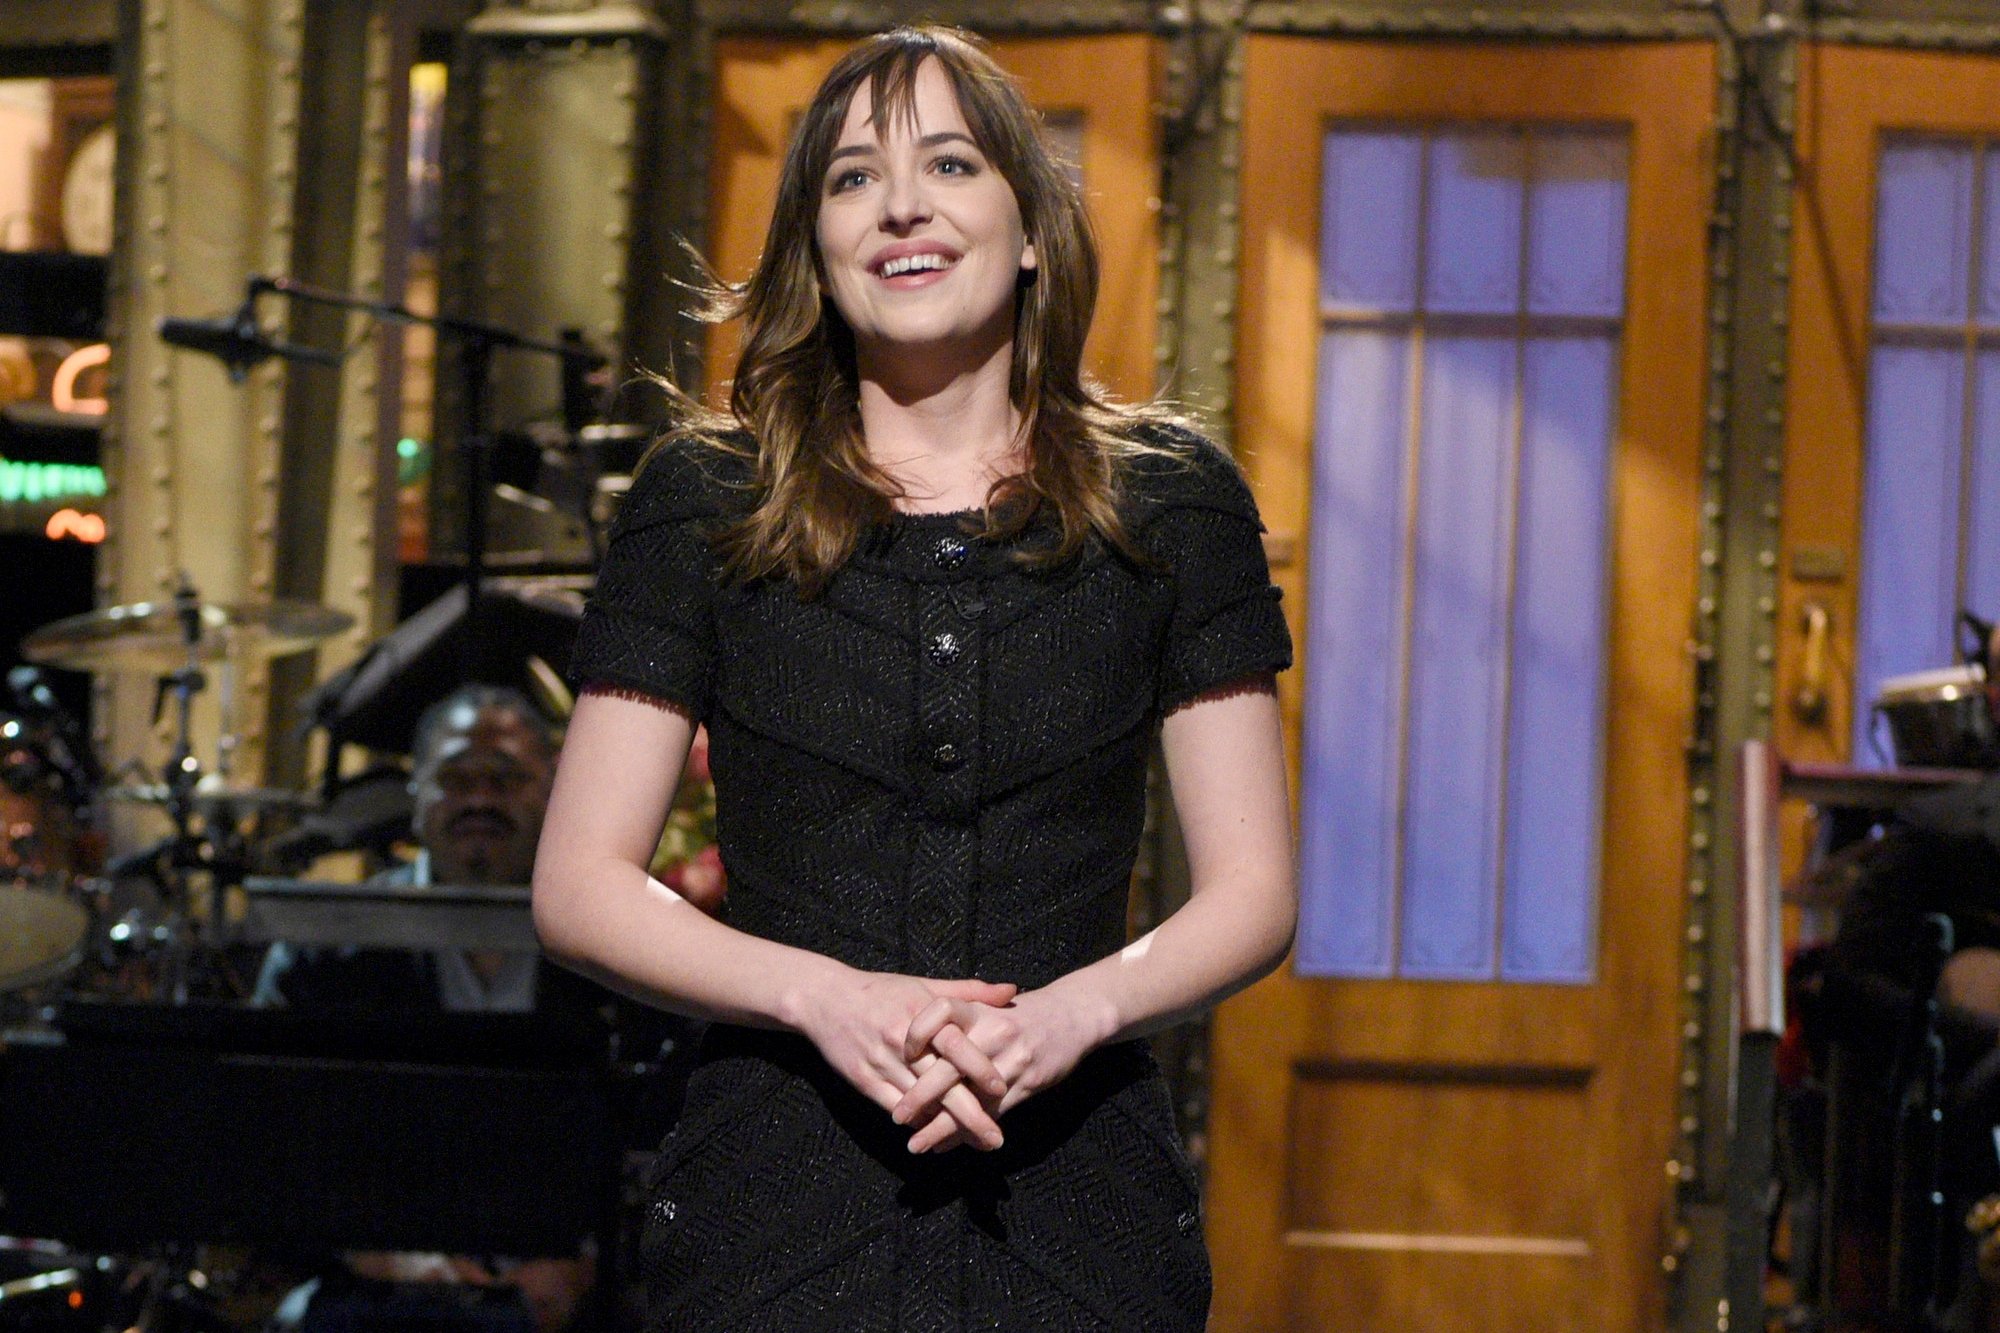 'Saturday Night Live' Dakota Johnson smiling and wearing a black dress on-stage. She's holding her hands together in front of her.